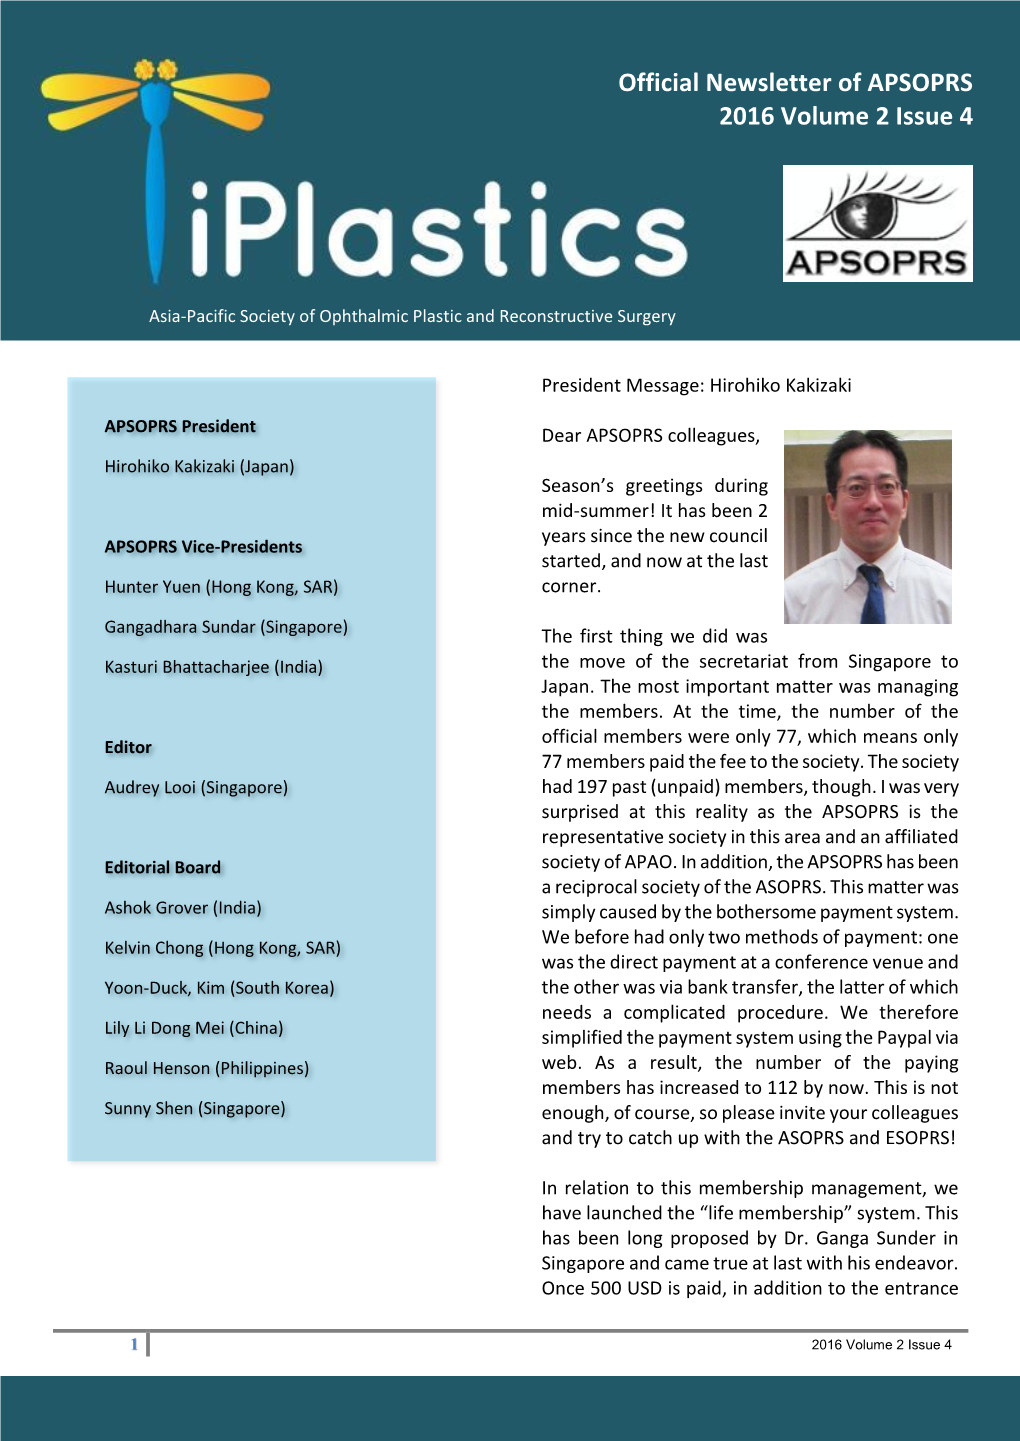 Official Newsletter of APSOPRS 2016 Volume 2 Issue 4